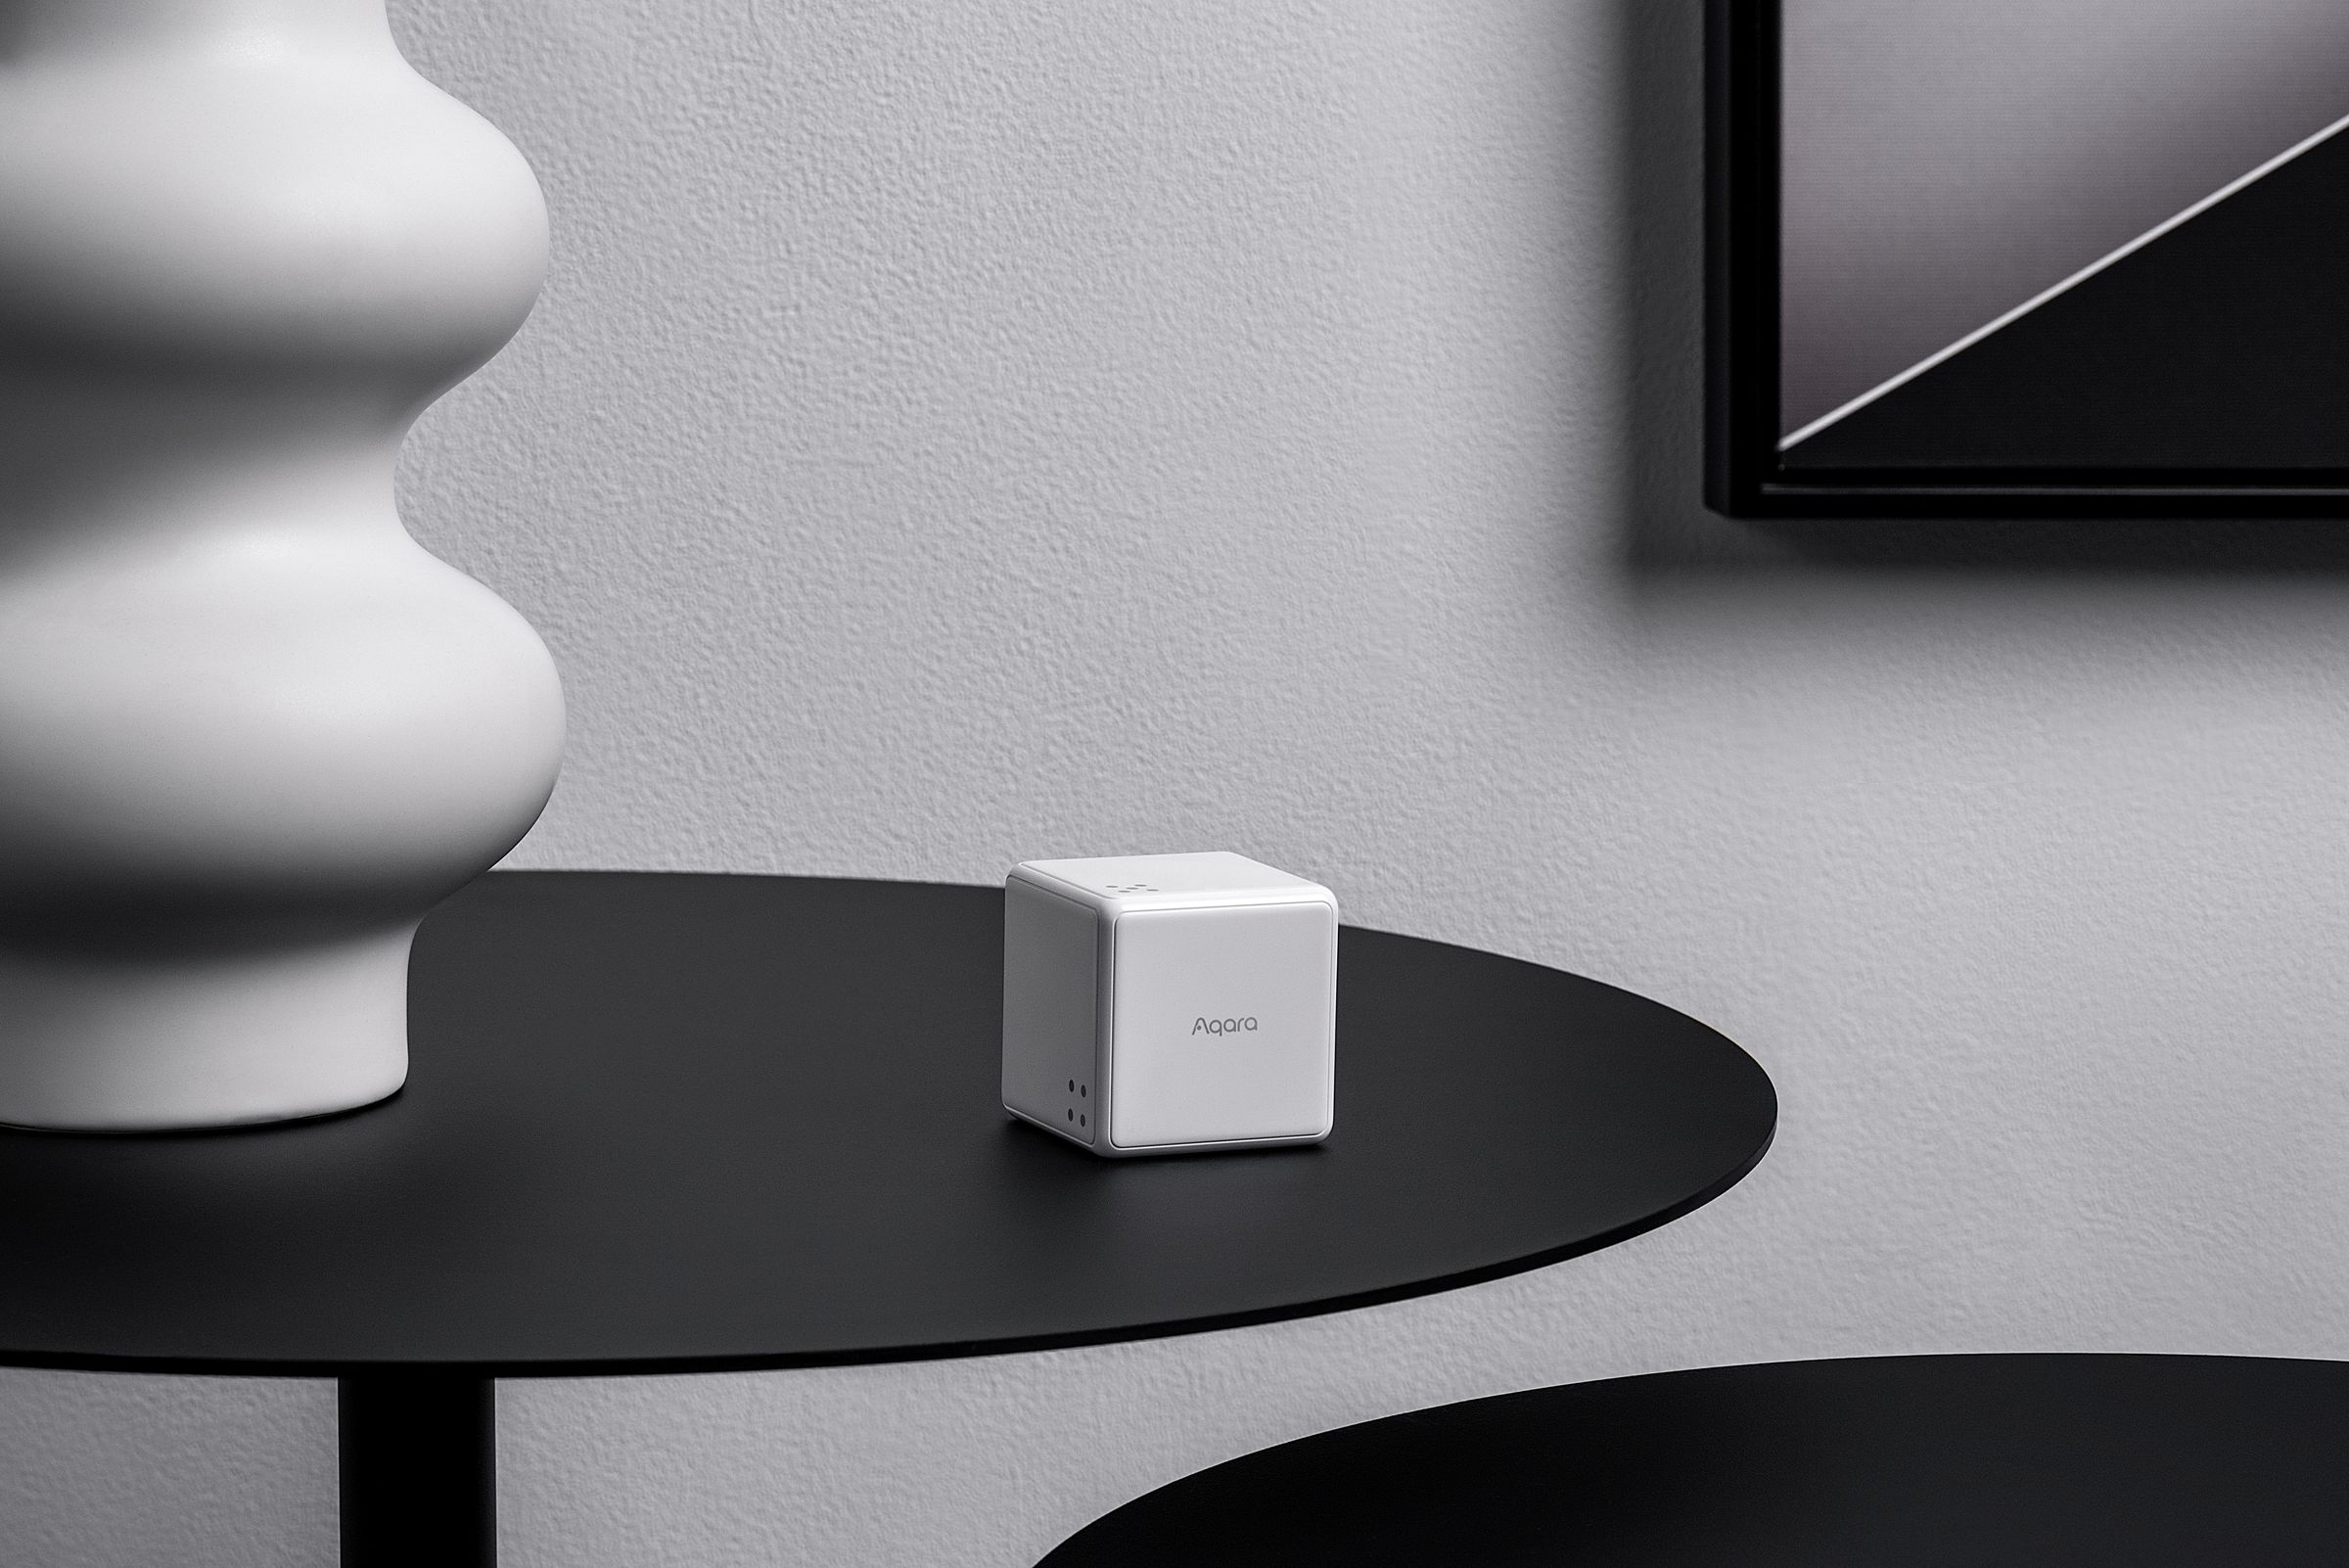 The Aqara Cube T1 Pro works with Apple Home and Amazon Alexa in addition to IFTTT and Aqara’s own platform.